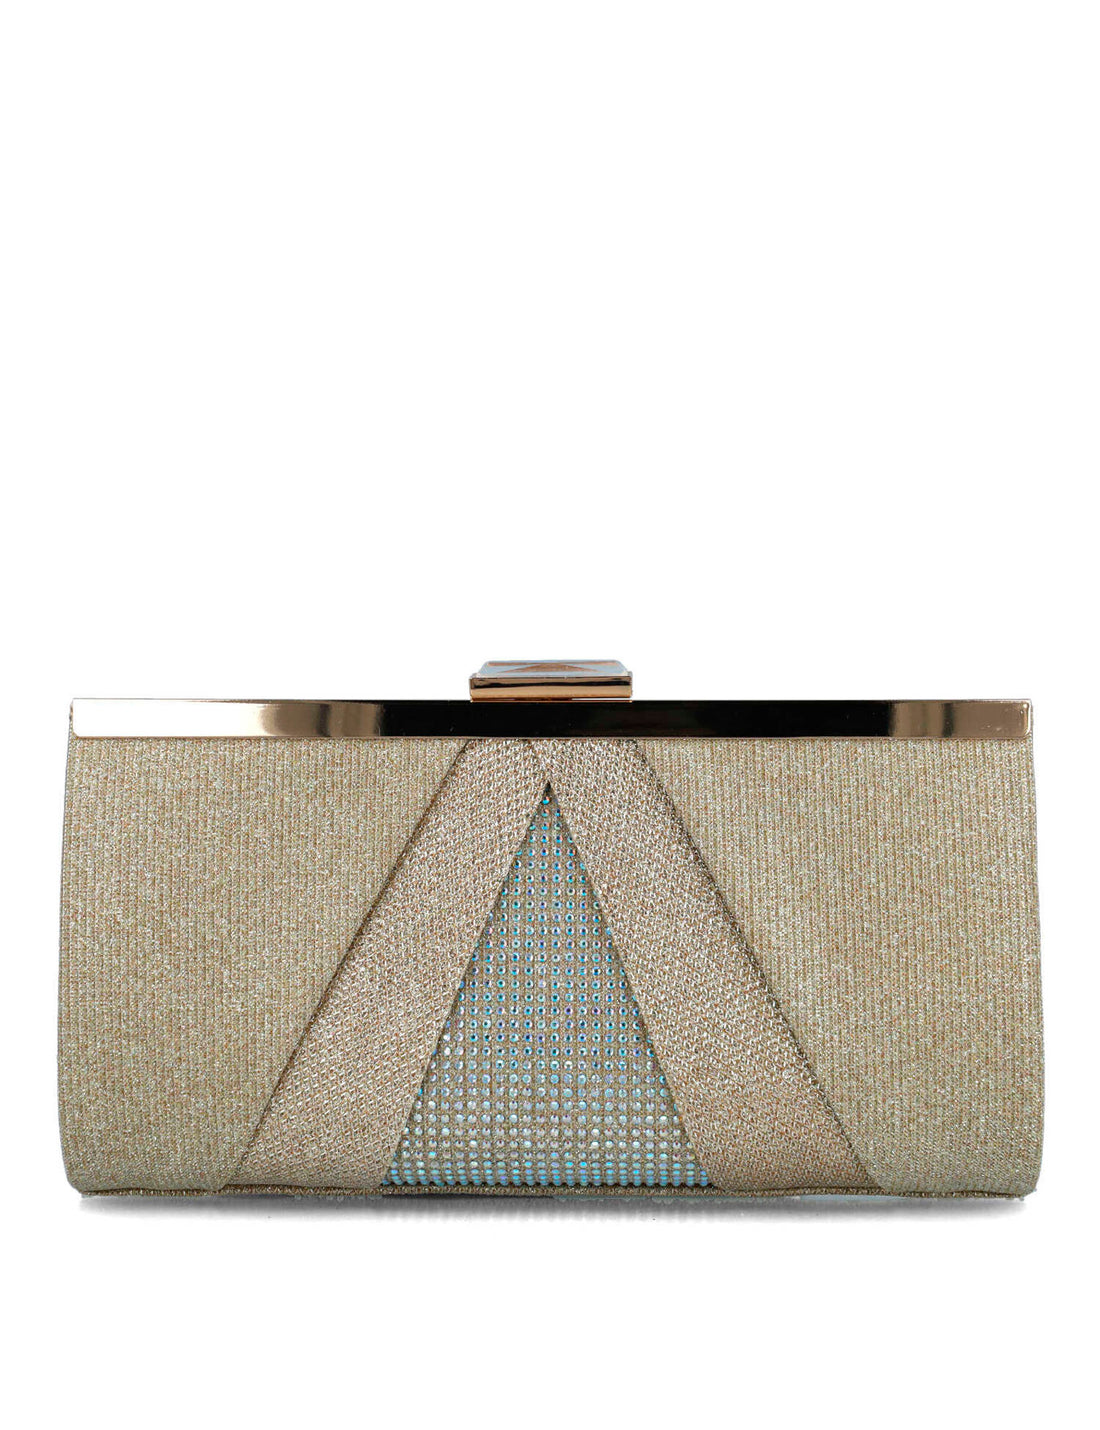 Beige Clutch With Gold Hardware_85511_00_01